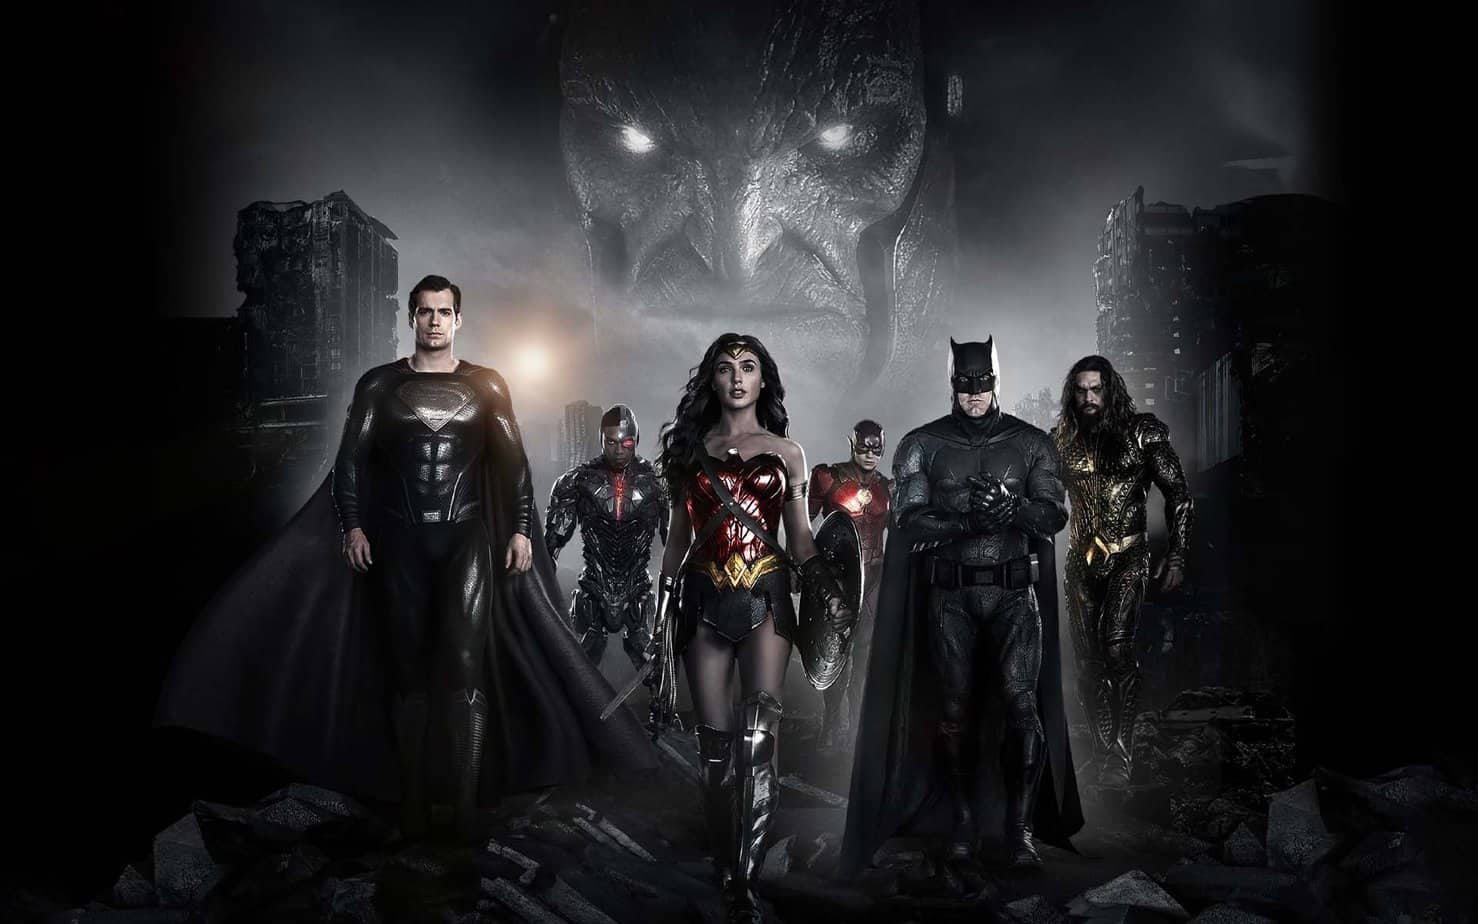 SNYDER CUT NEW PHOTOS - Time to start the hype again